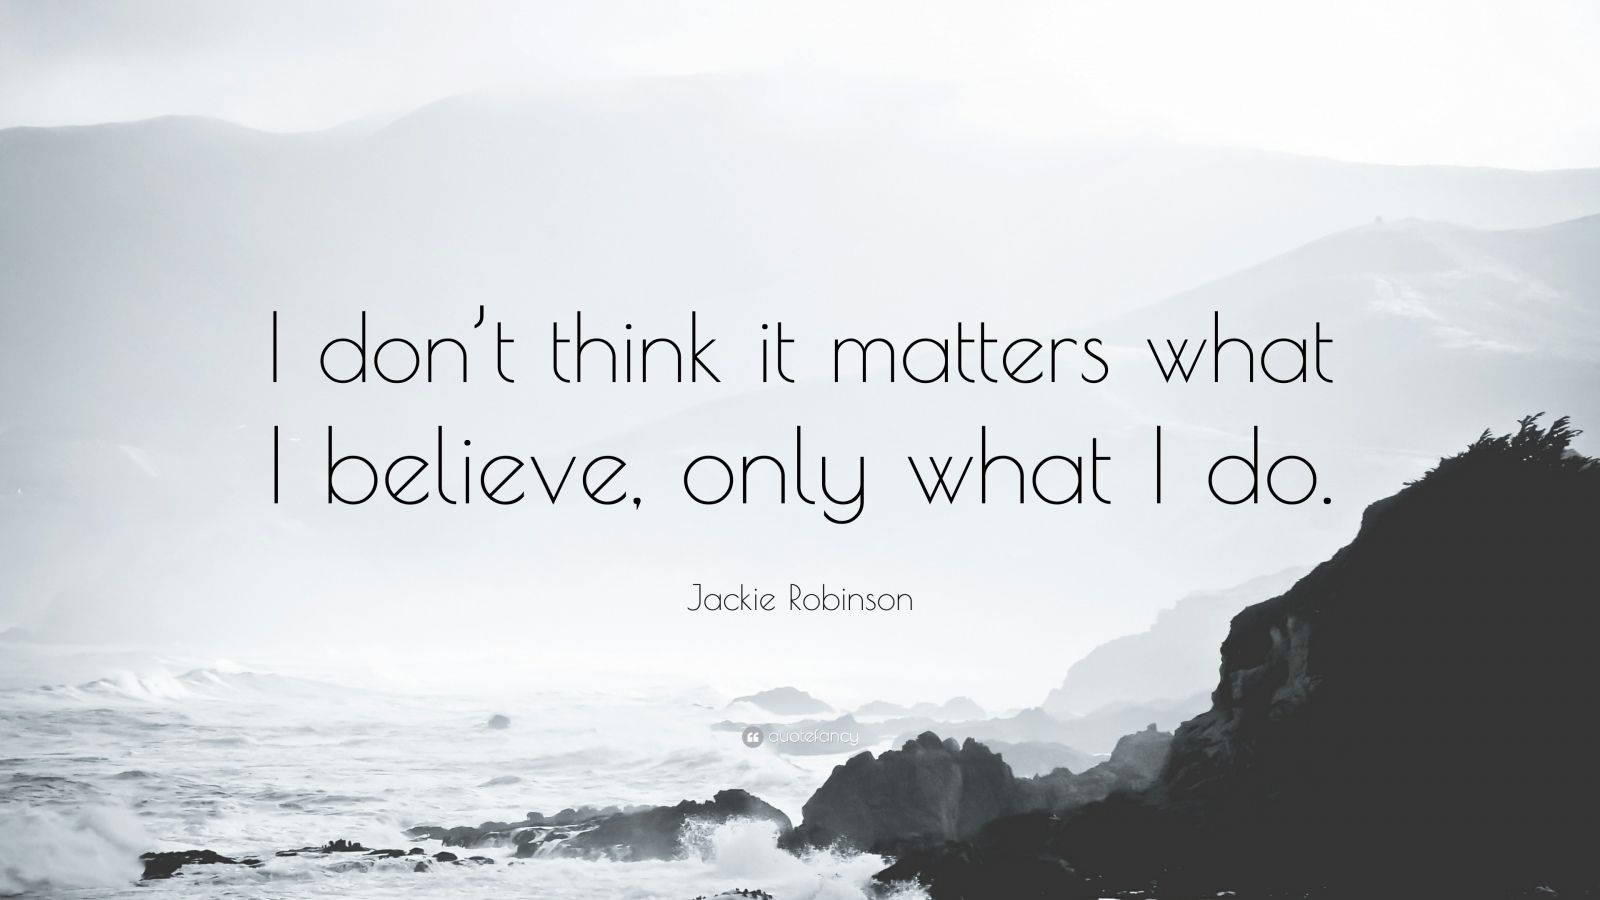 Download Jackie Robinson Quote About Life Wallpaper